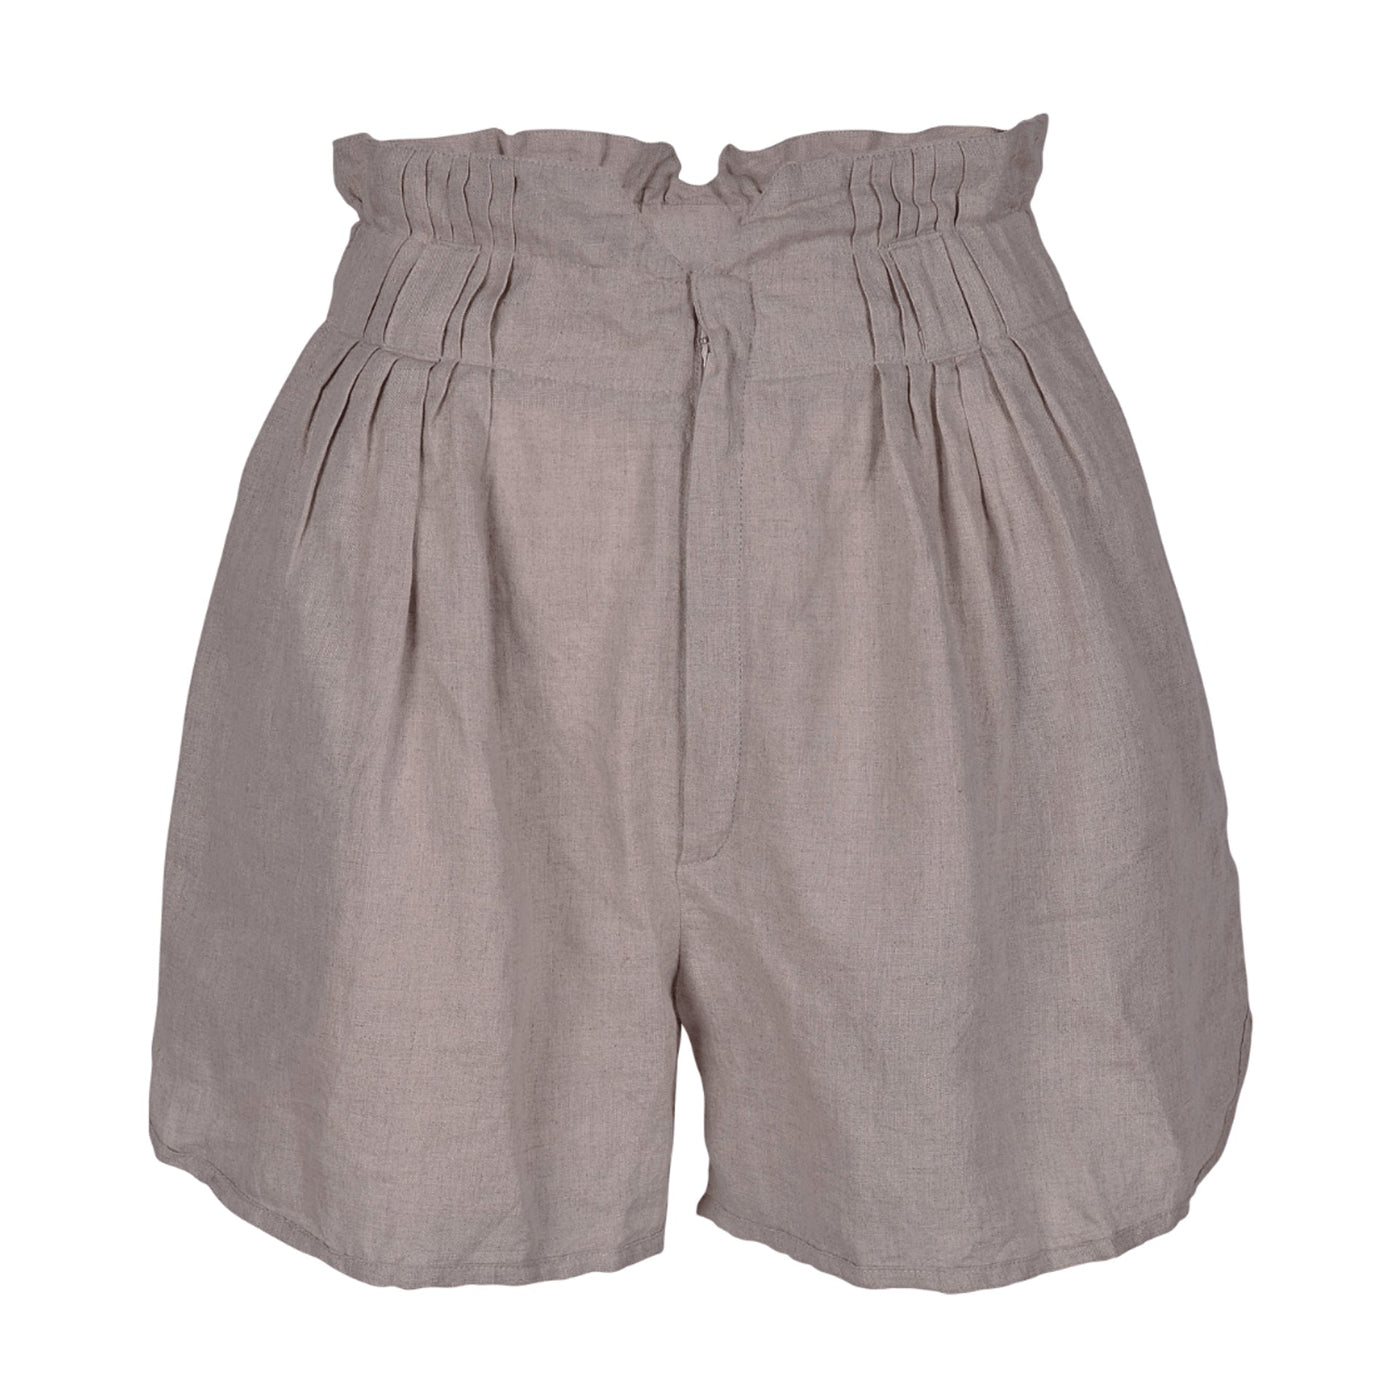 NTG Fad Shorts Sand / S Elastic pleated zip casual shorts-（Hand Made）